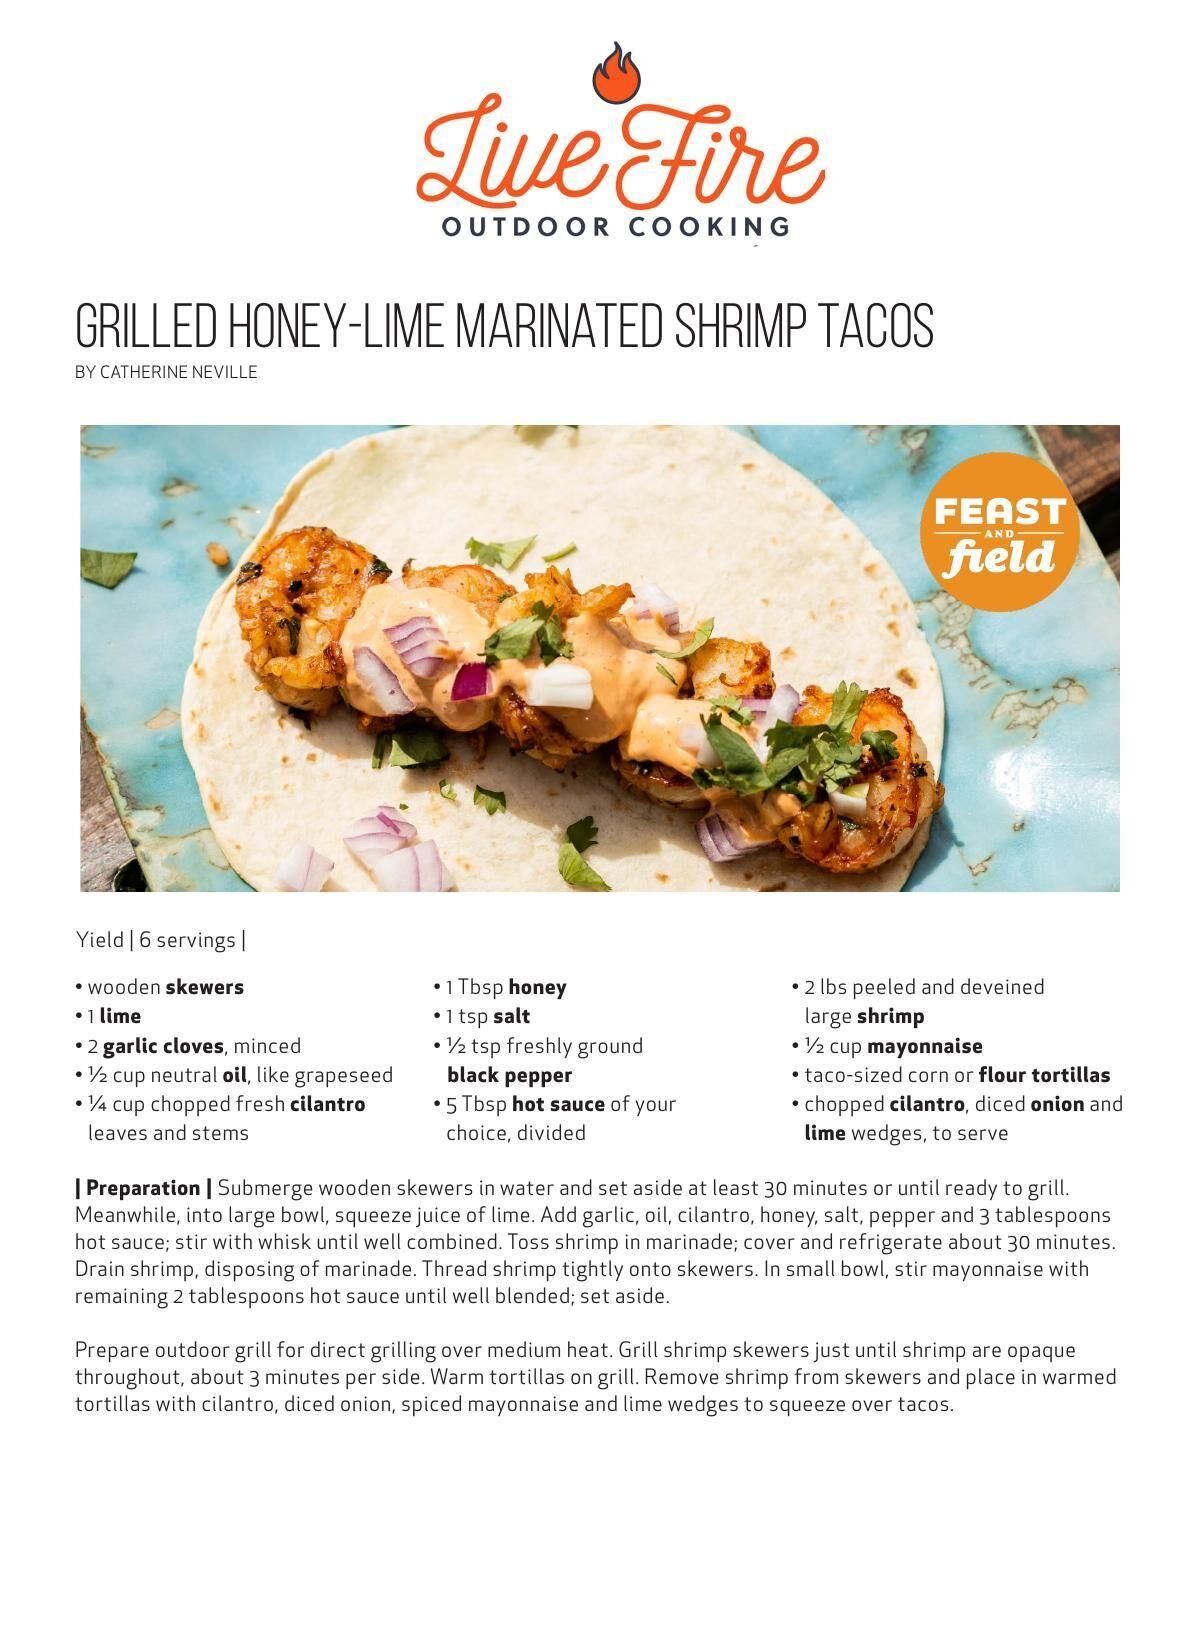 Download the Grilled Honey-Lime Marinated Shrimp Tacos recipe